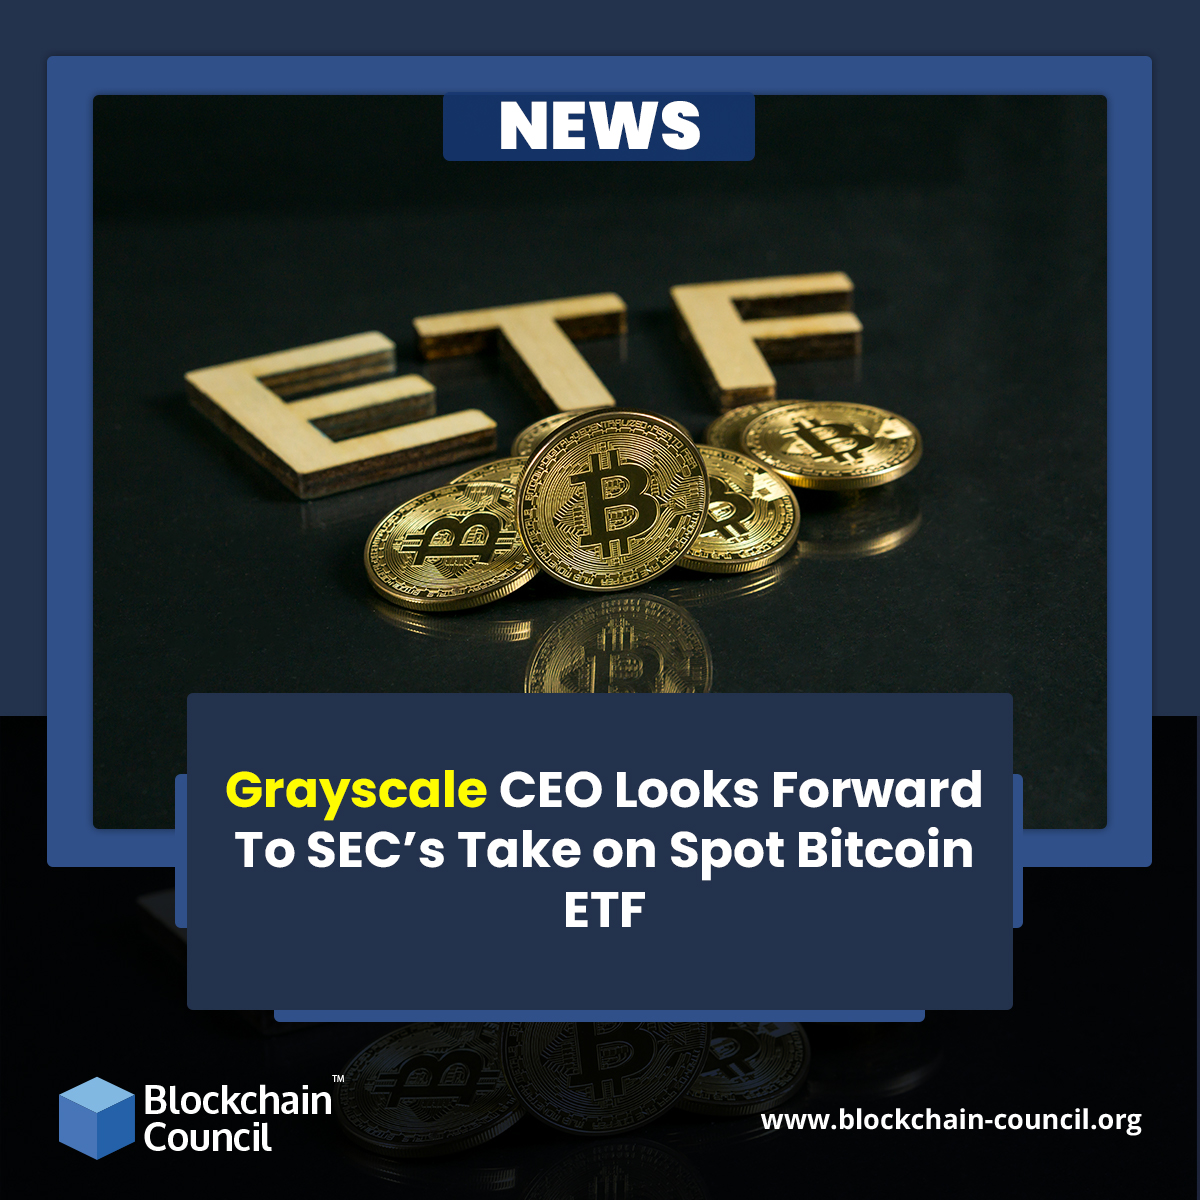 Grayscale CEO Looks Forward To SEC’s Take on Spot Bitcoin ETF